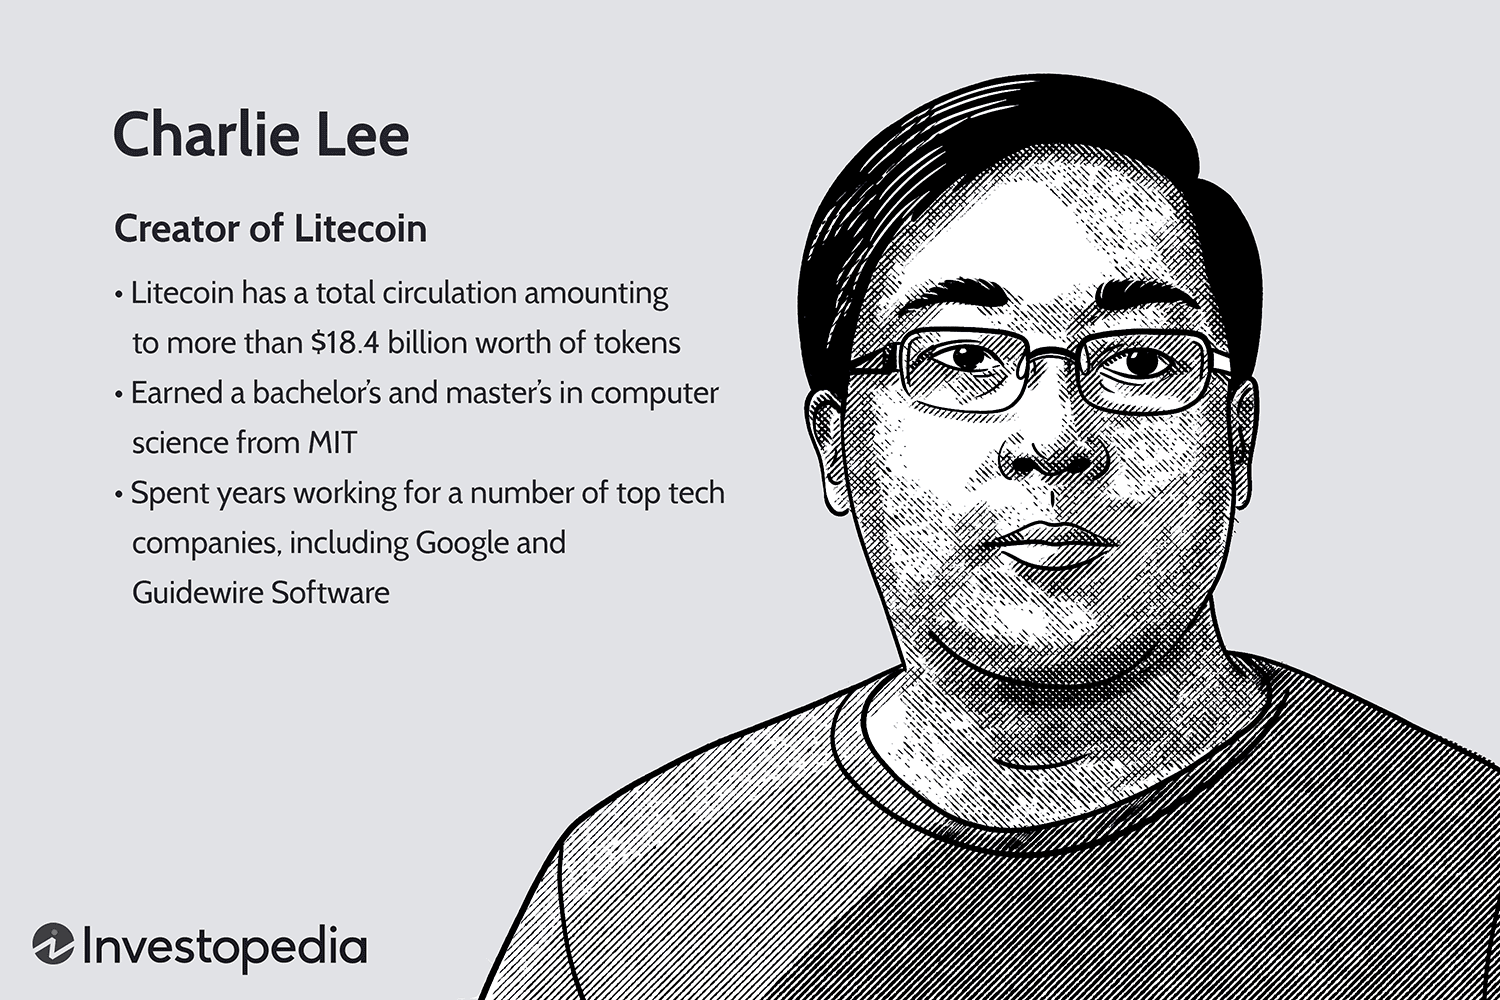 Litecoin Founder Charlie Lee on Decision to Sell Entire Crypto Holding